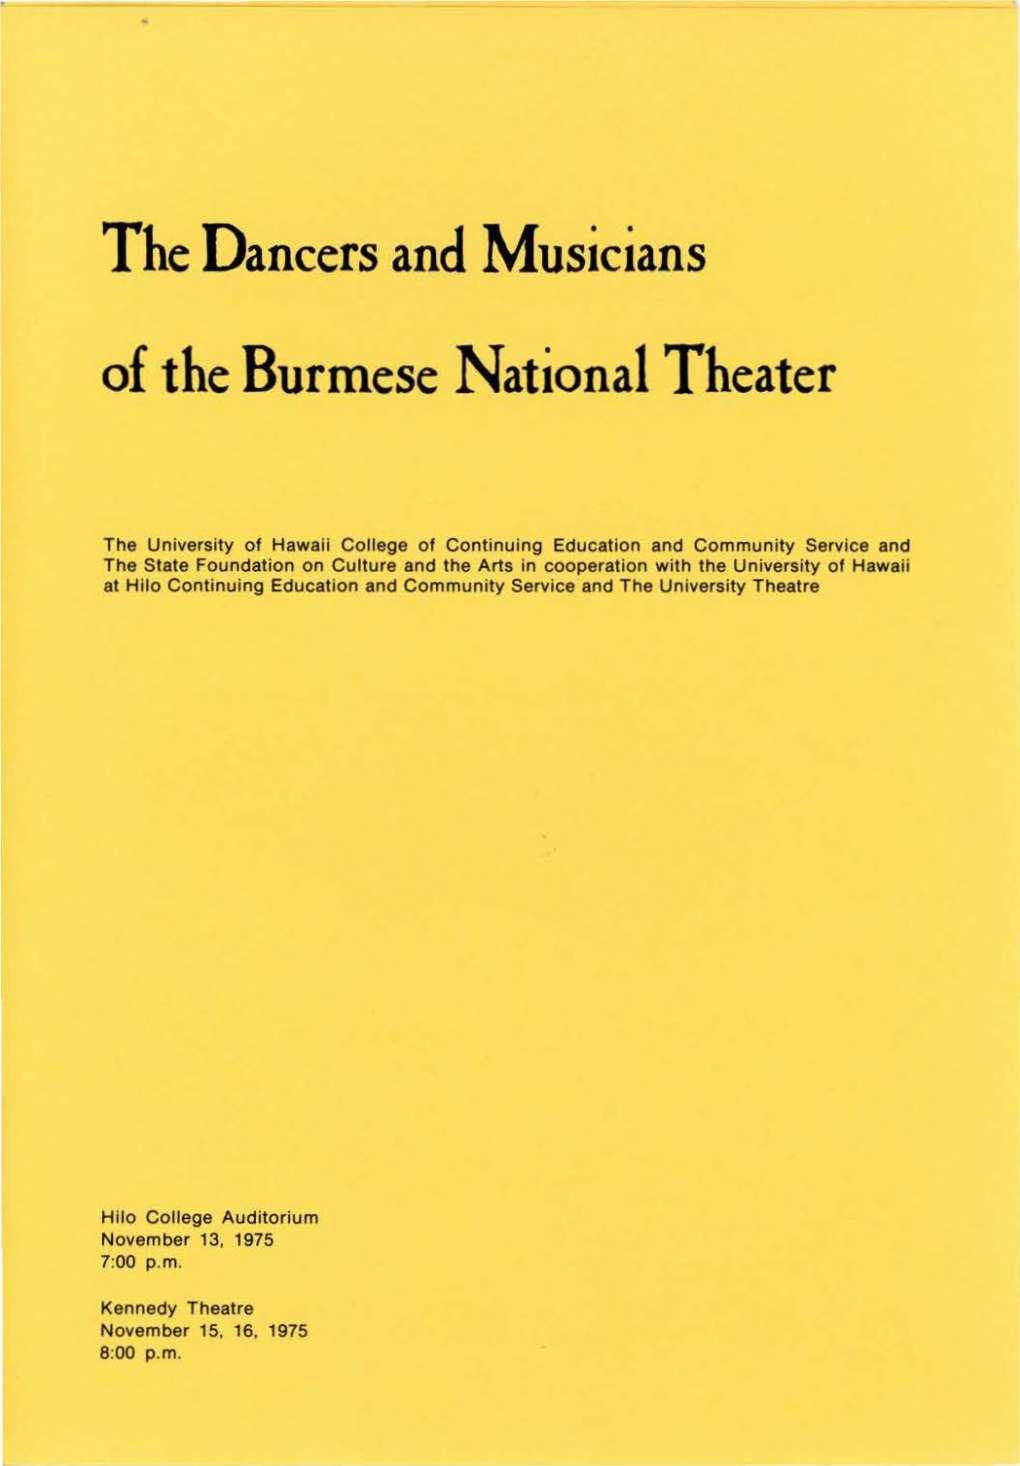 The Dancers and Musicians of the Burmese National Theater